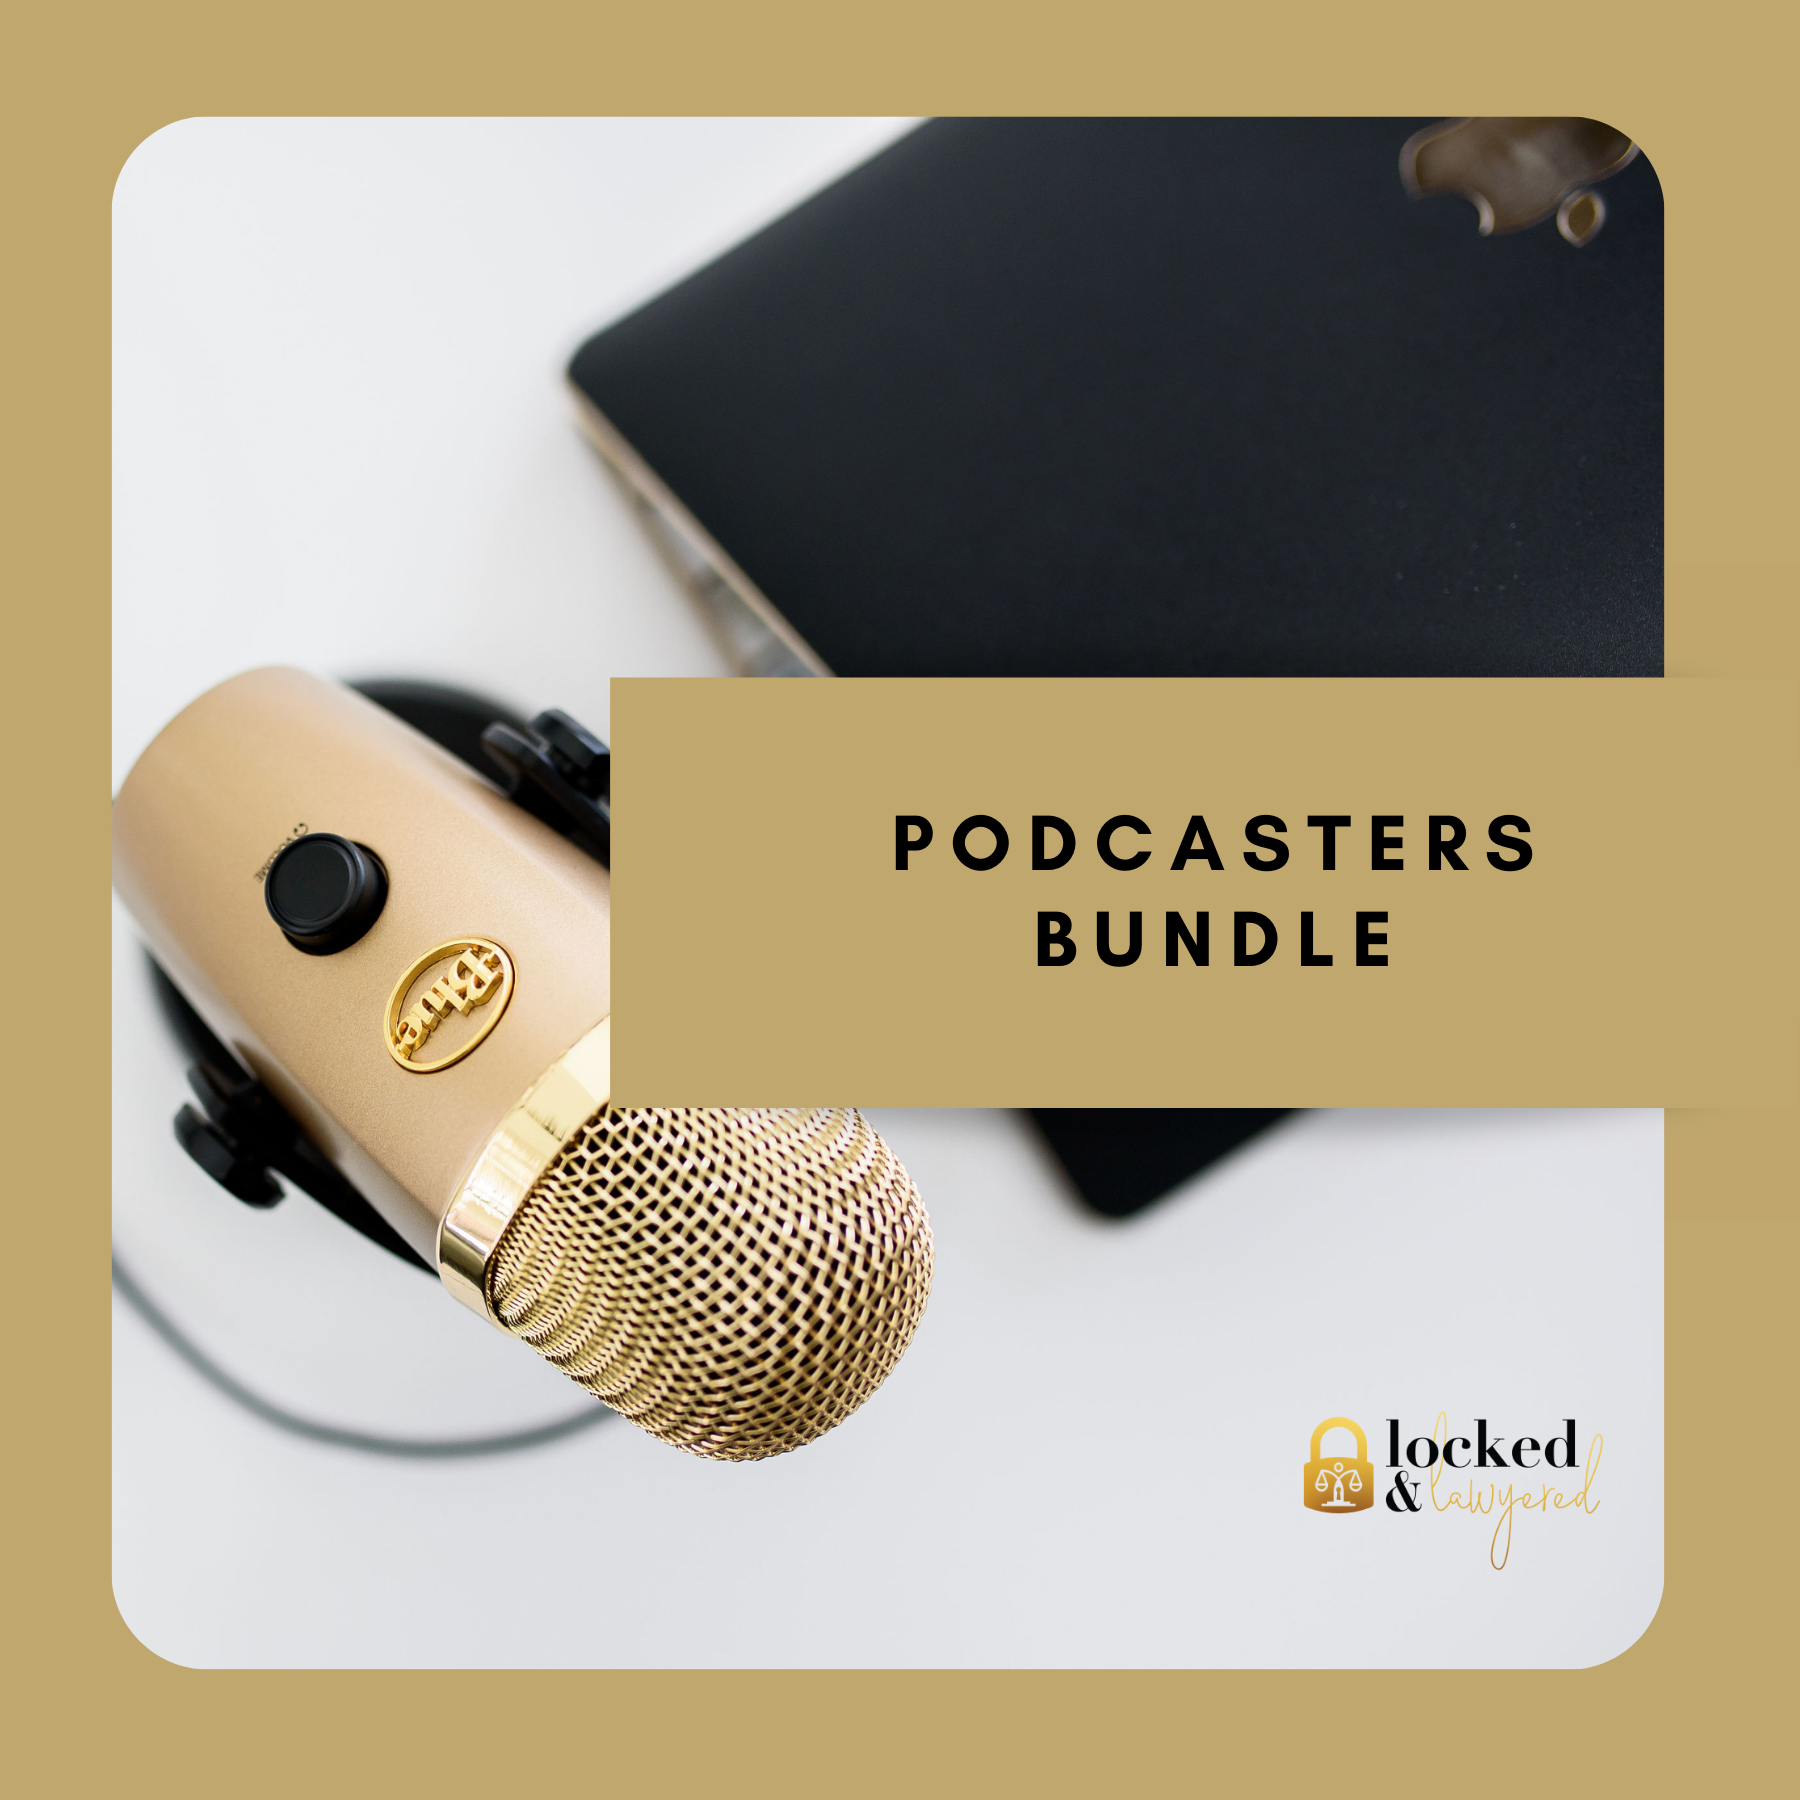 Podcasters Bundle